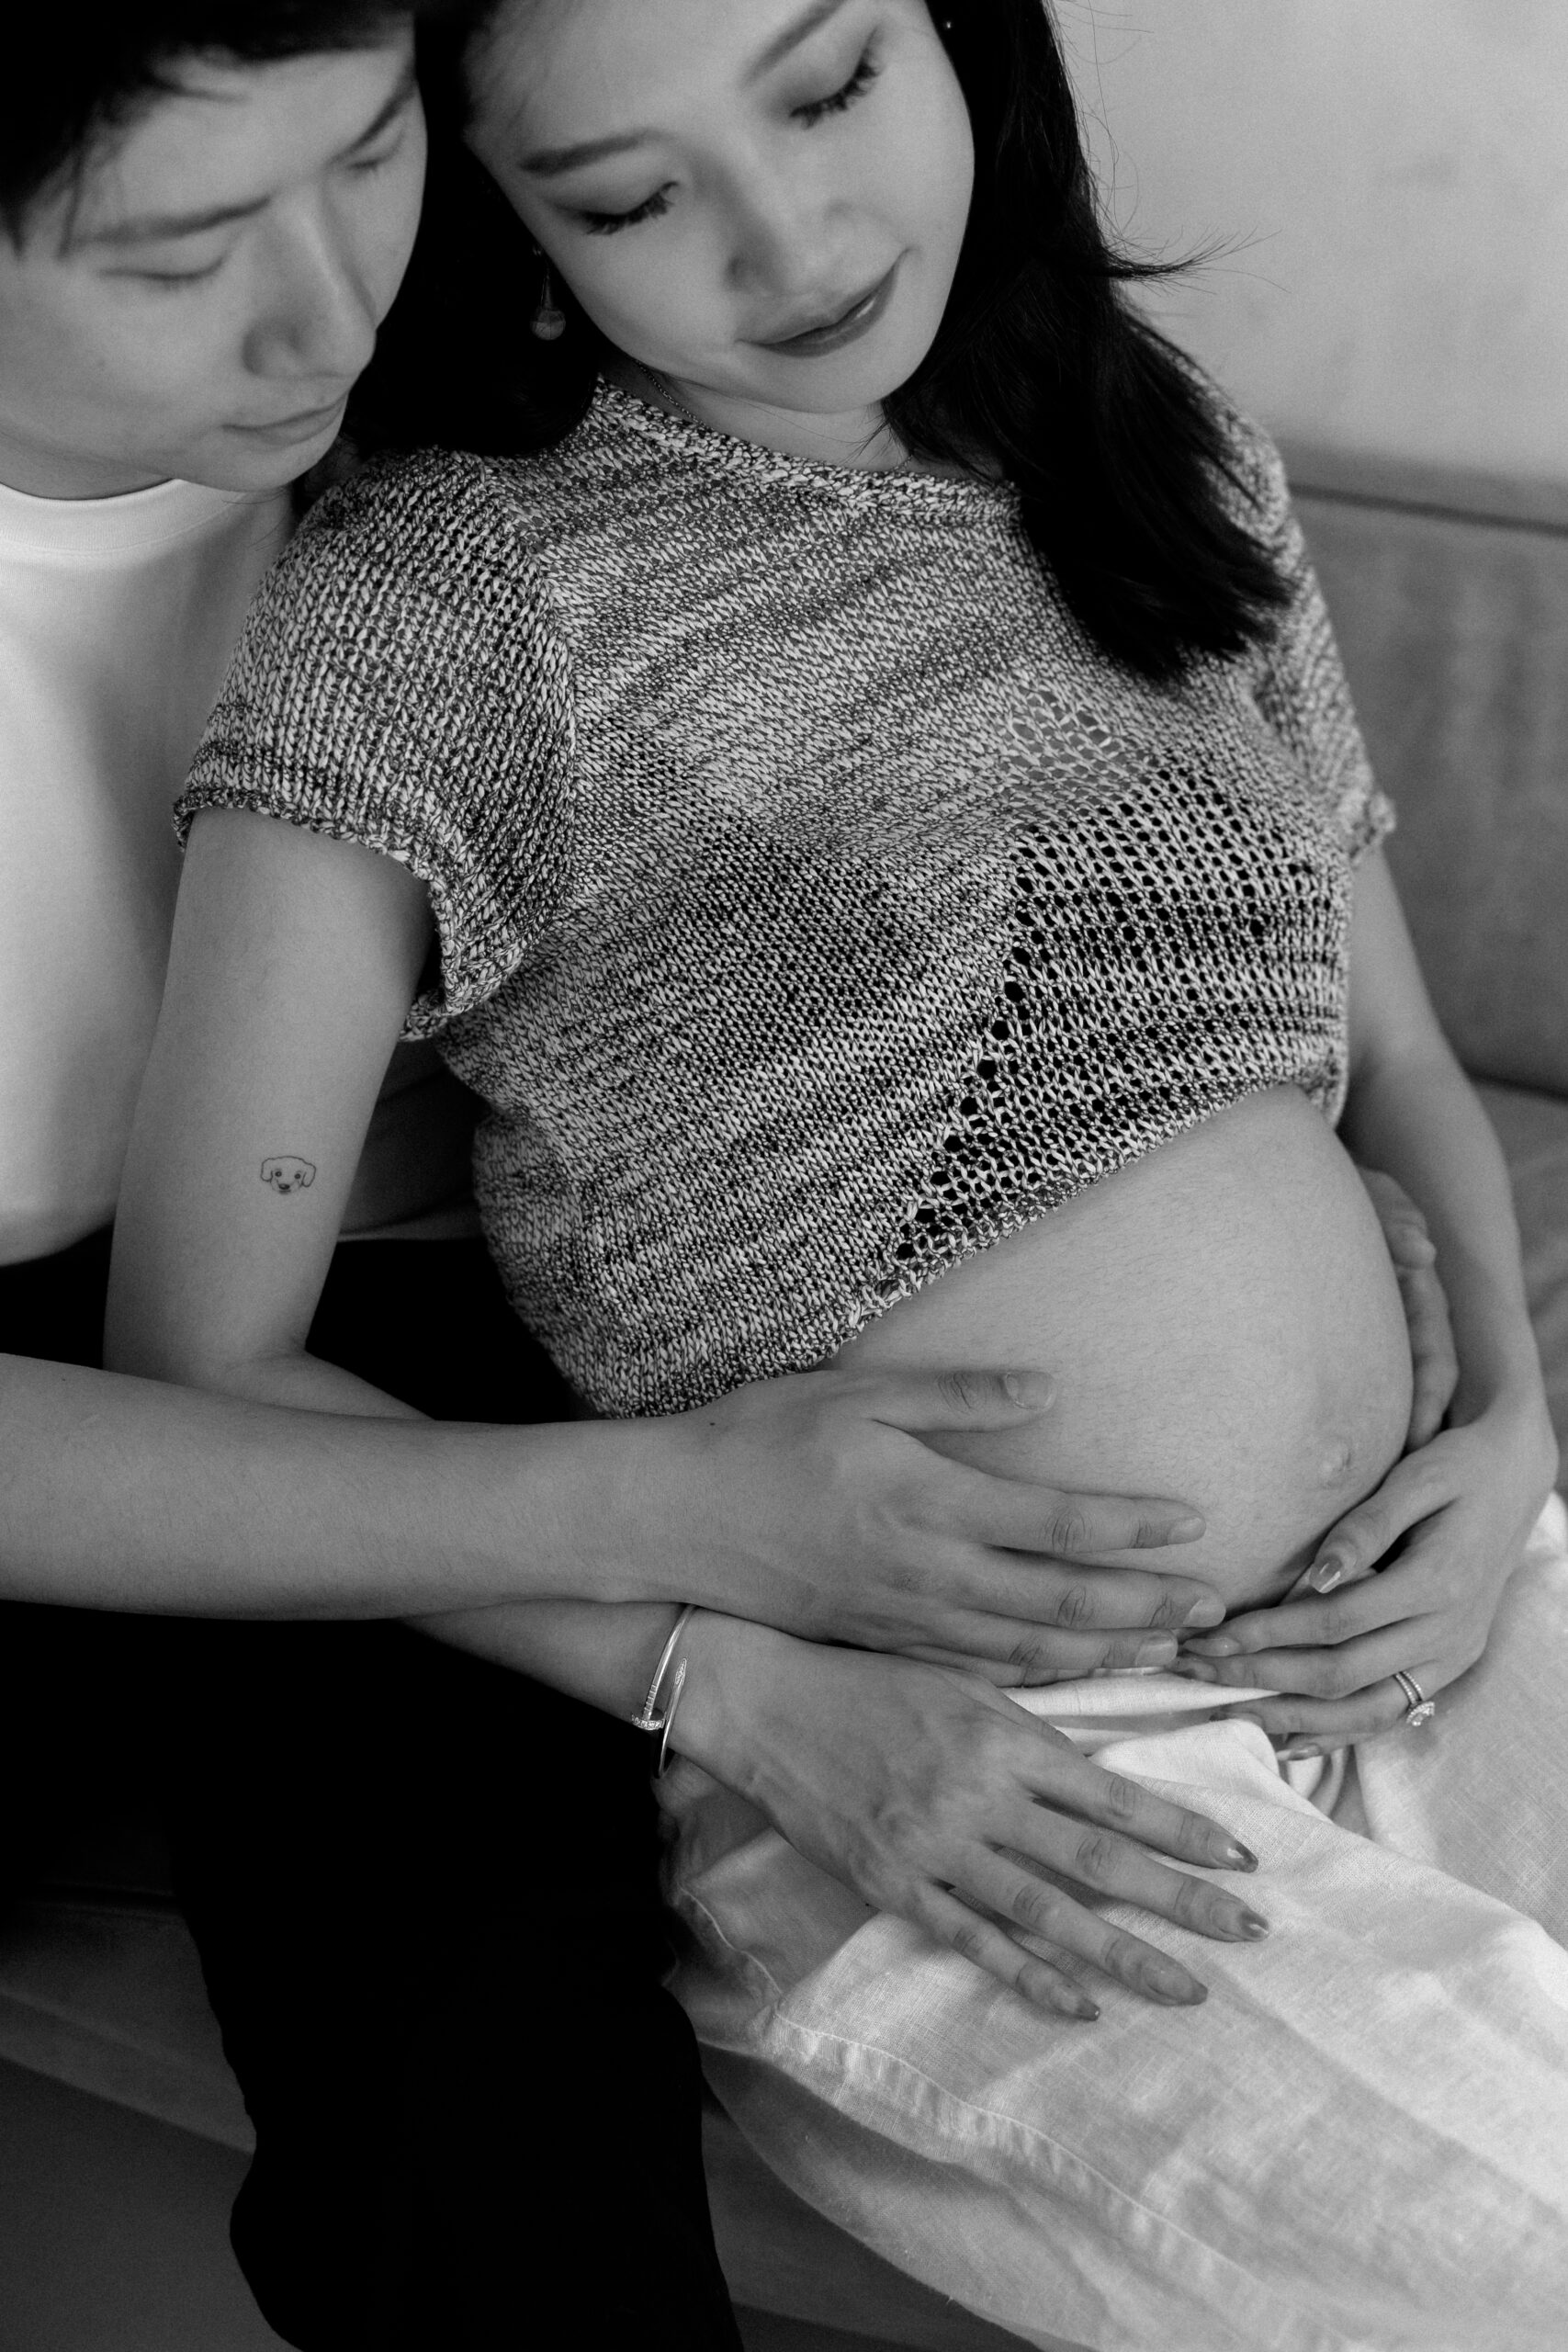 A young couple embraces on a couch with their hands on her pregnant belly.